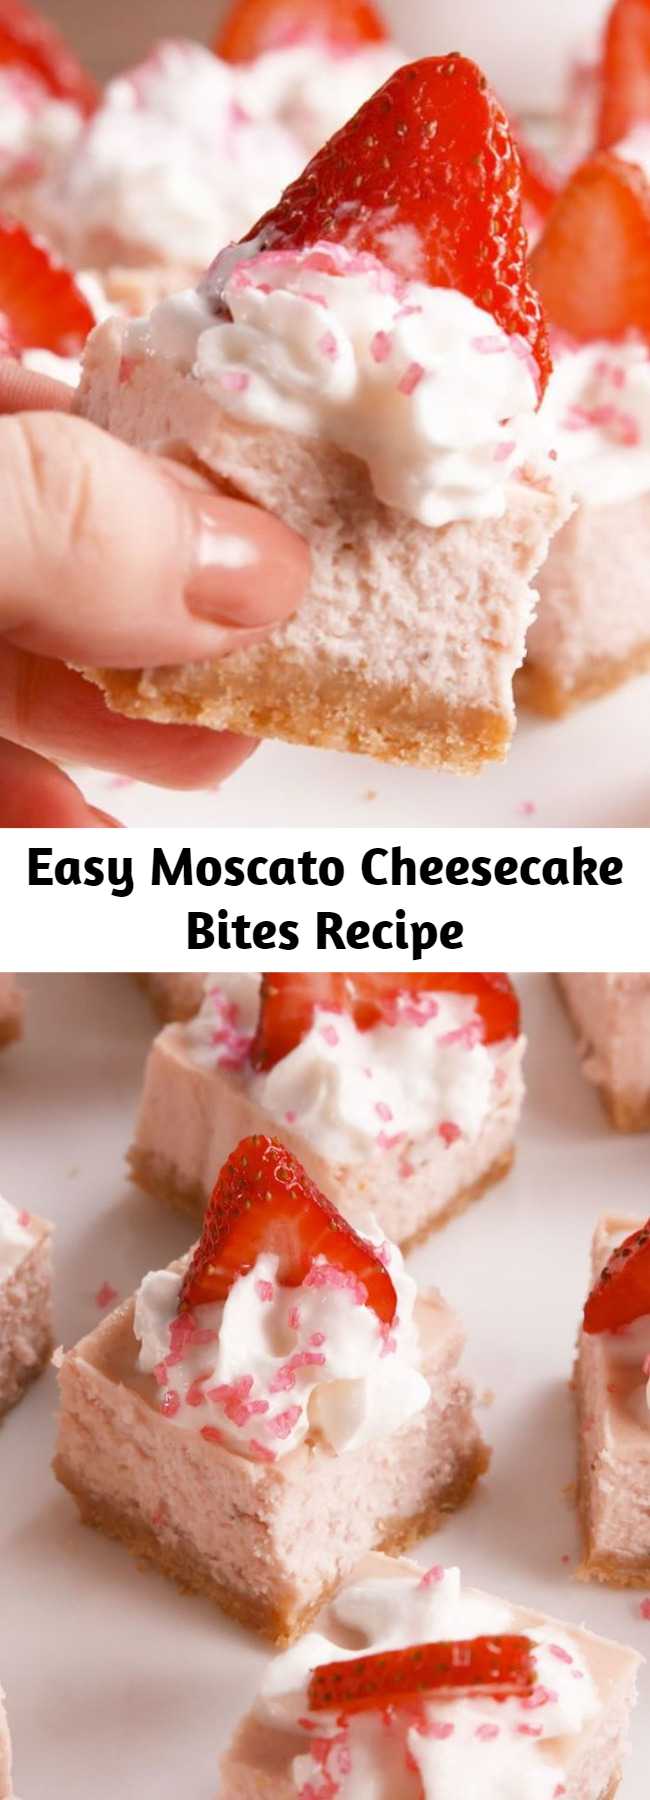 Easy Moscato Cheesecake Bites Recipe - A cheesecake that's as fancy as you. #recipe #easyrecipe #dessert #cheesecake #cheese #strawberry #strawberries #strawberryrecipes #whippedcream #creamcheese #moscato #wine